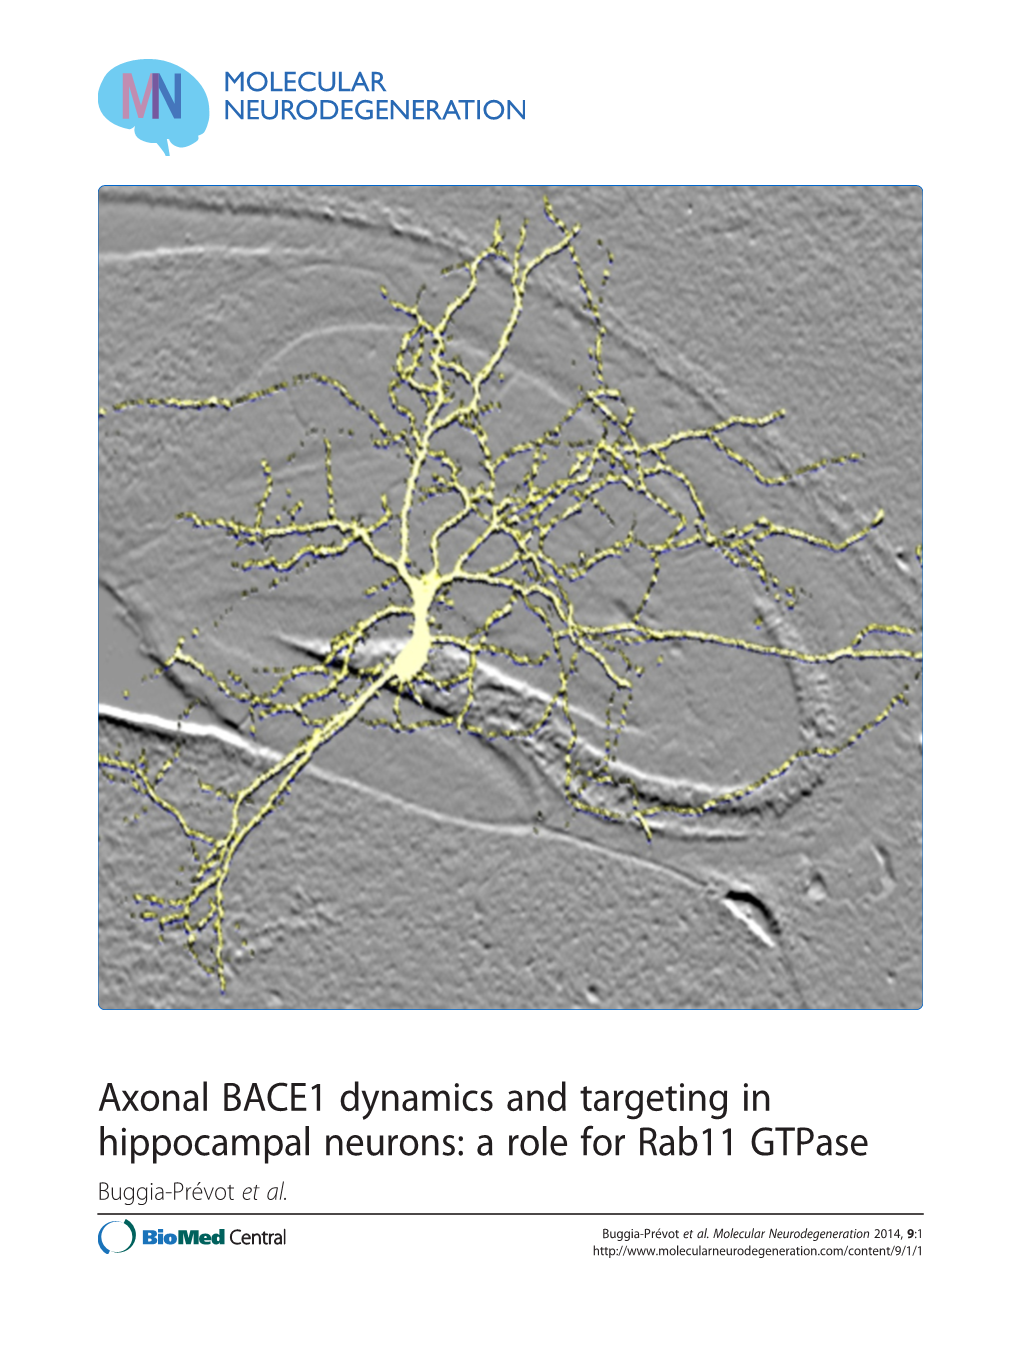 Axonal BACE1 Dynamics and Targeting in Hippocampal Neurons: a Role for Rab11 Gtpase Buggia-Prévot Et Al